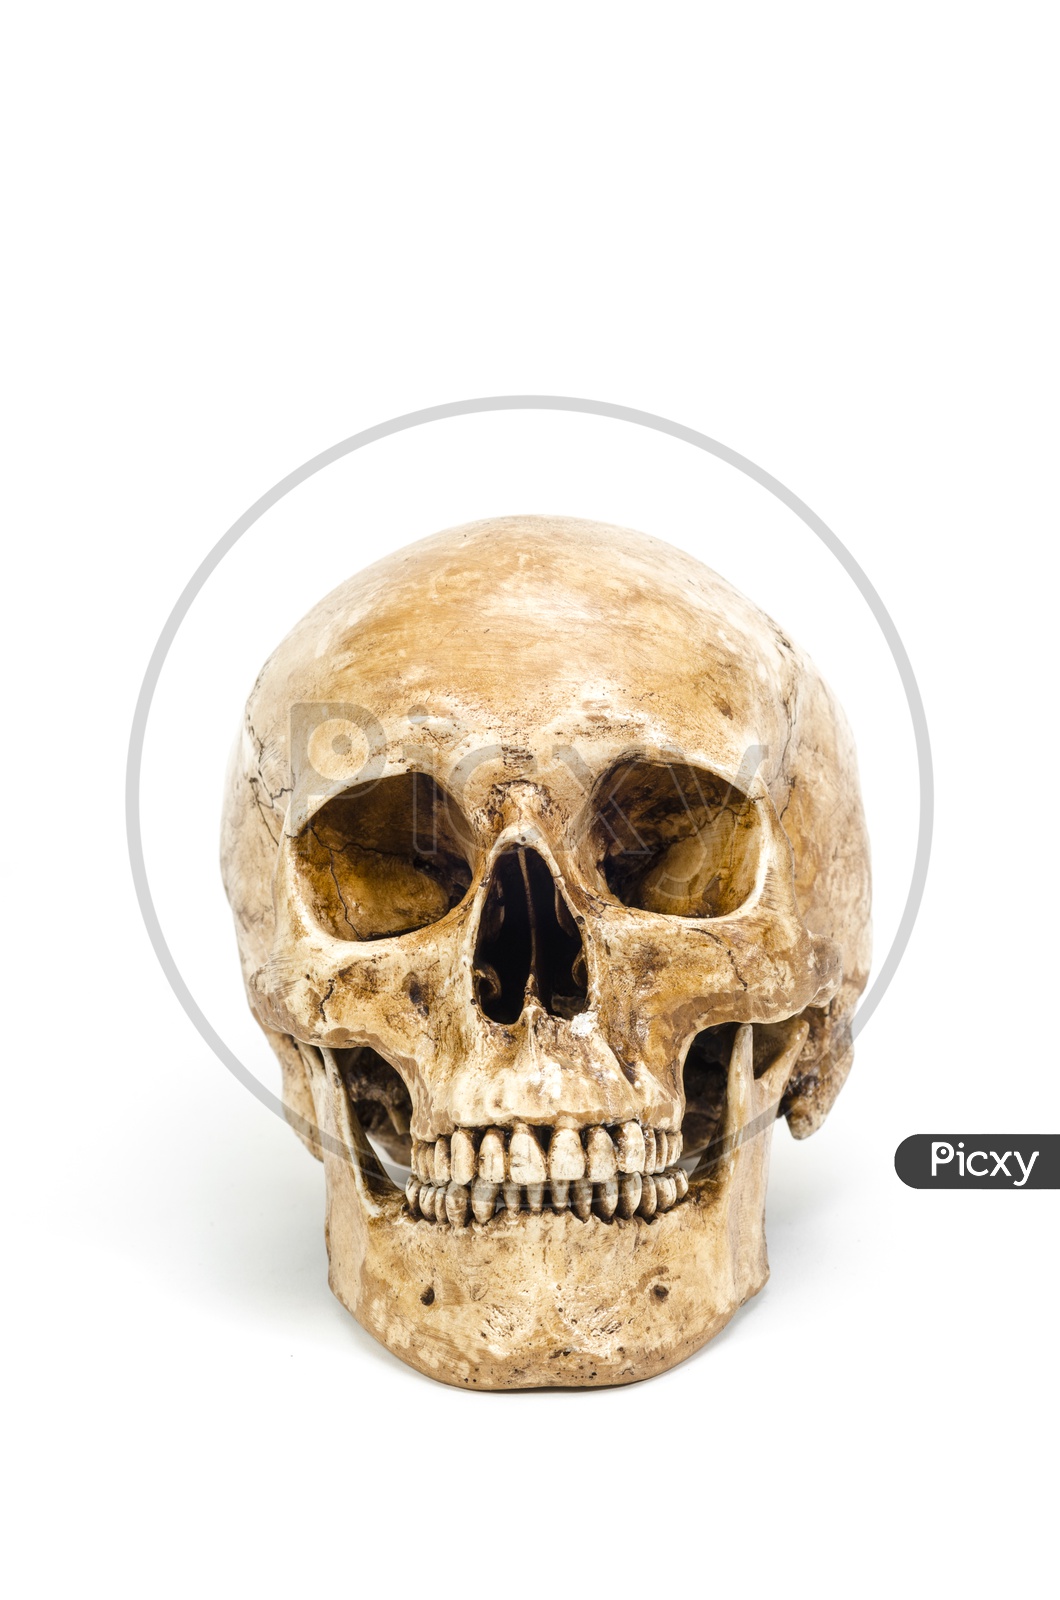 Front view of human skull isolated on white background